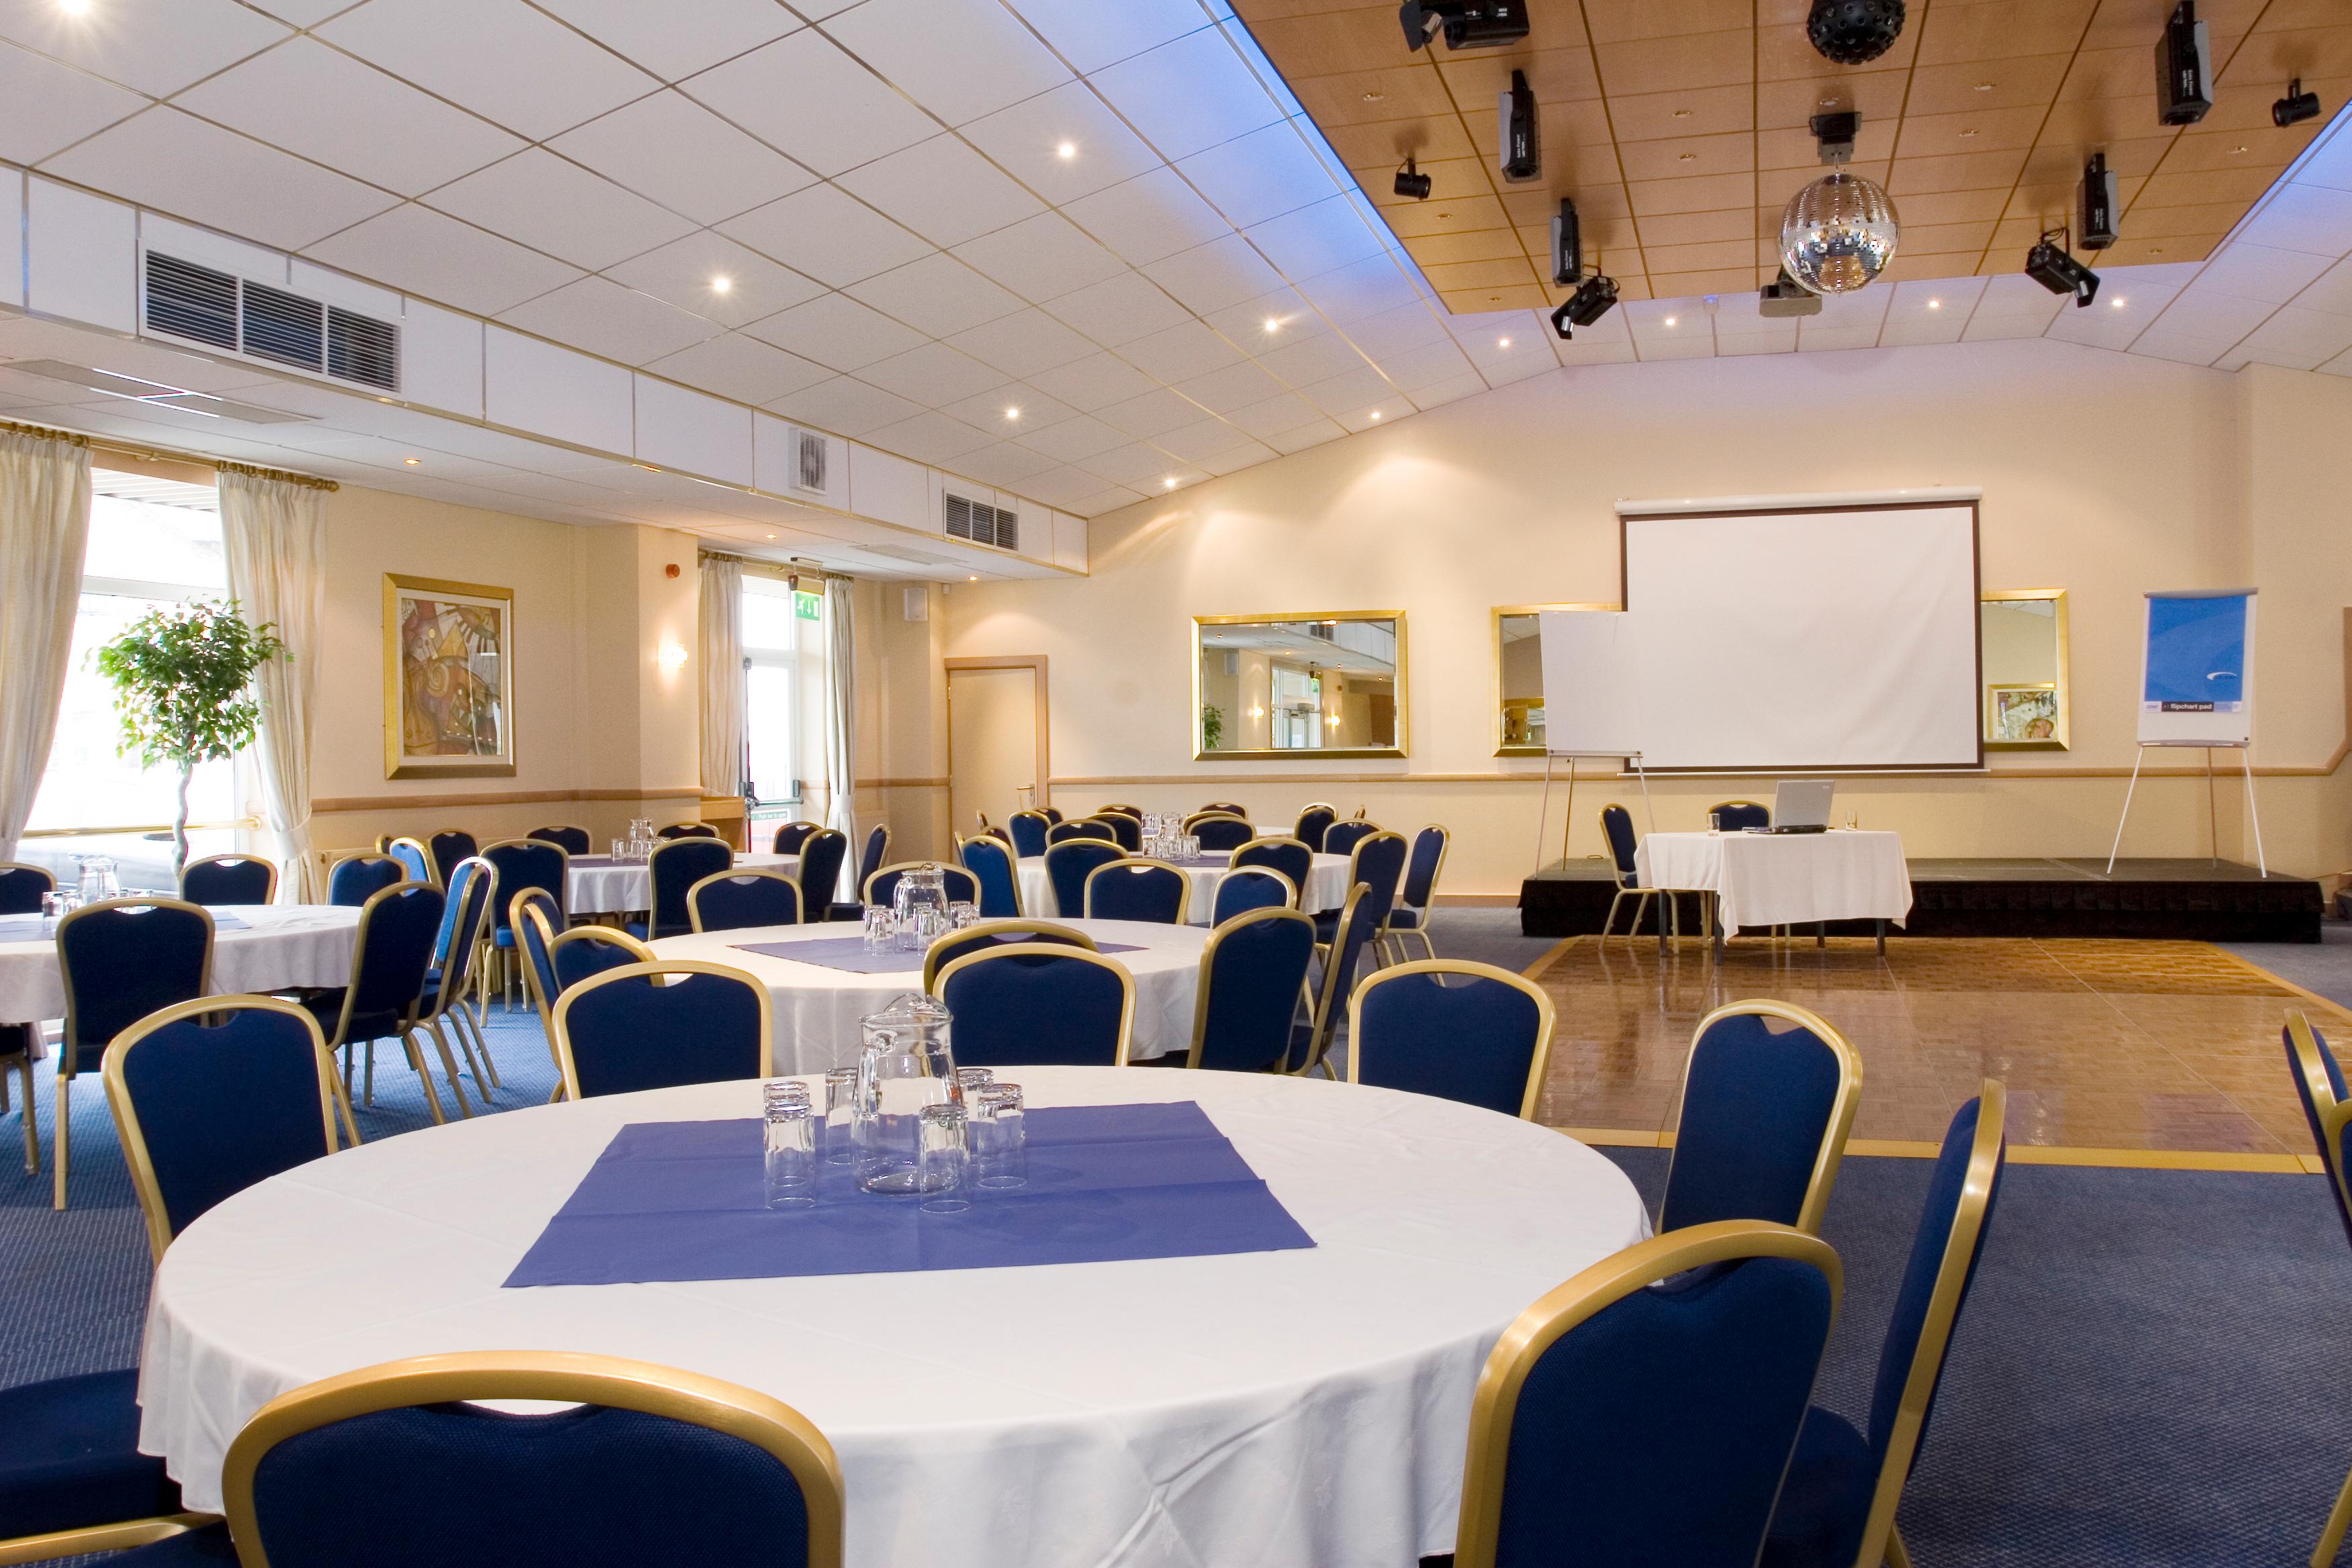 Bluebell Banqueting Suite, The Fairway And Bluebell Banqueting Suite photo #2